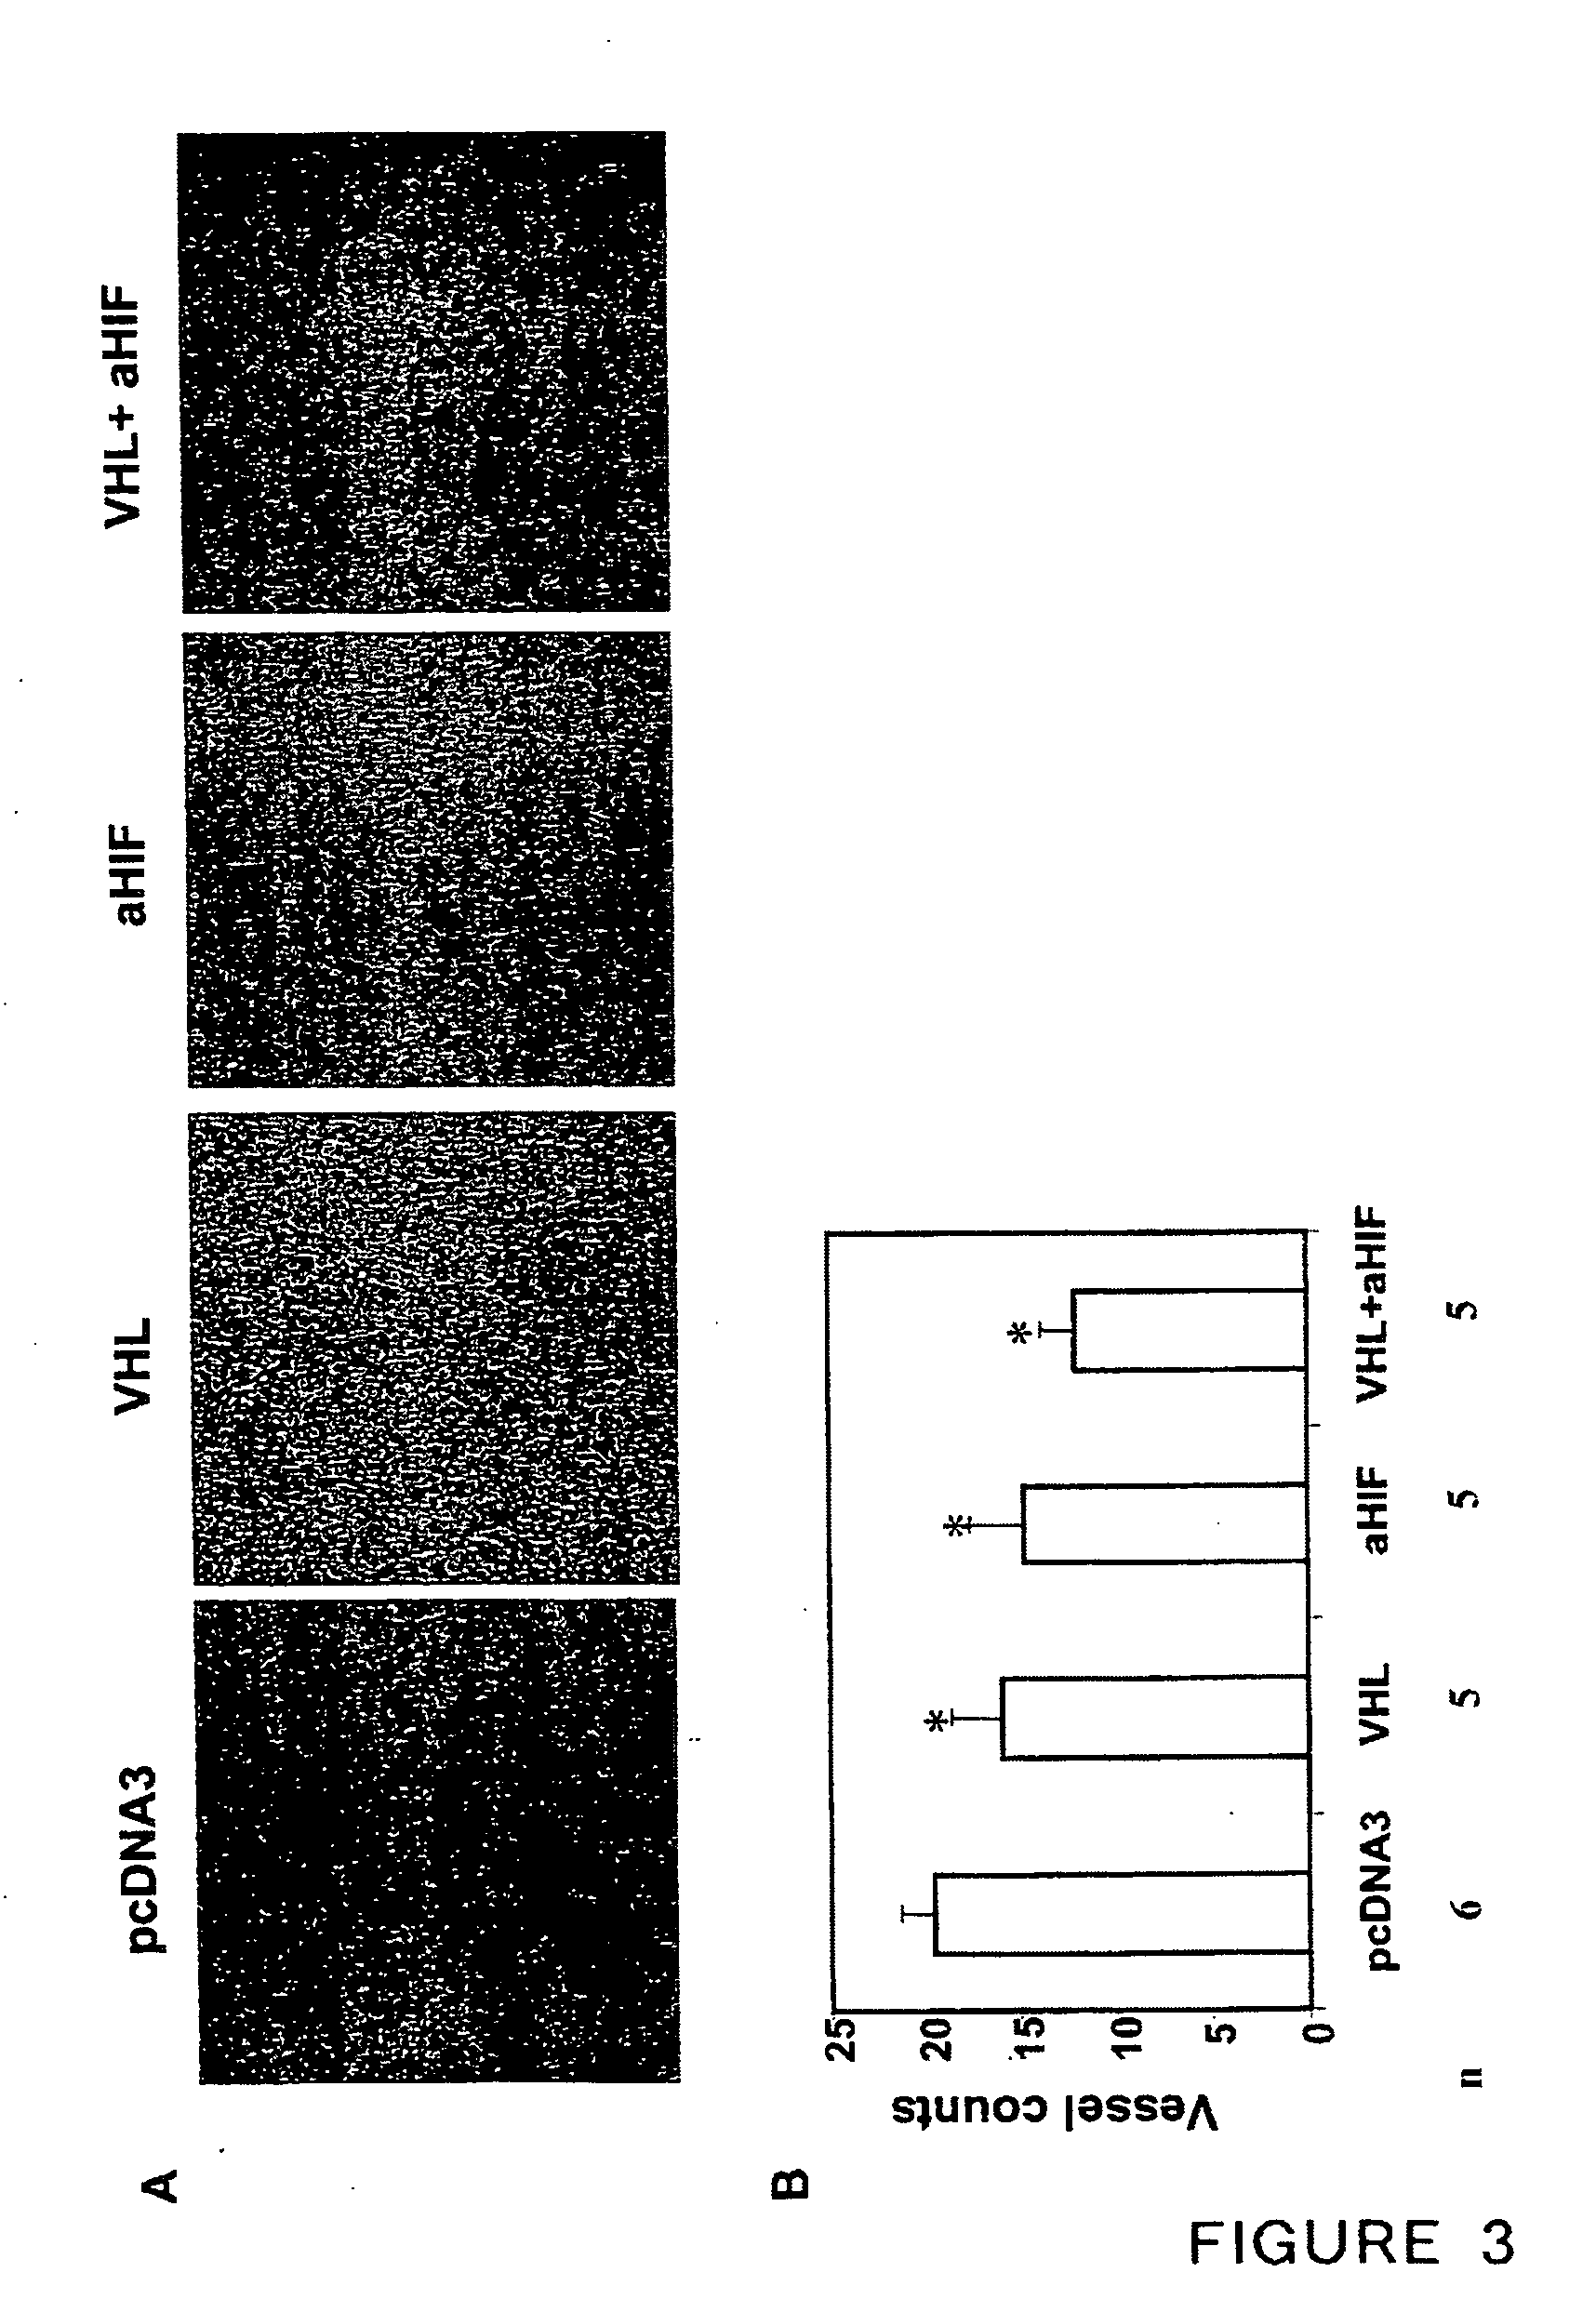 Tumor treating combinations, compositions and methods